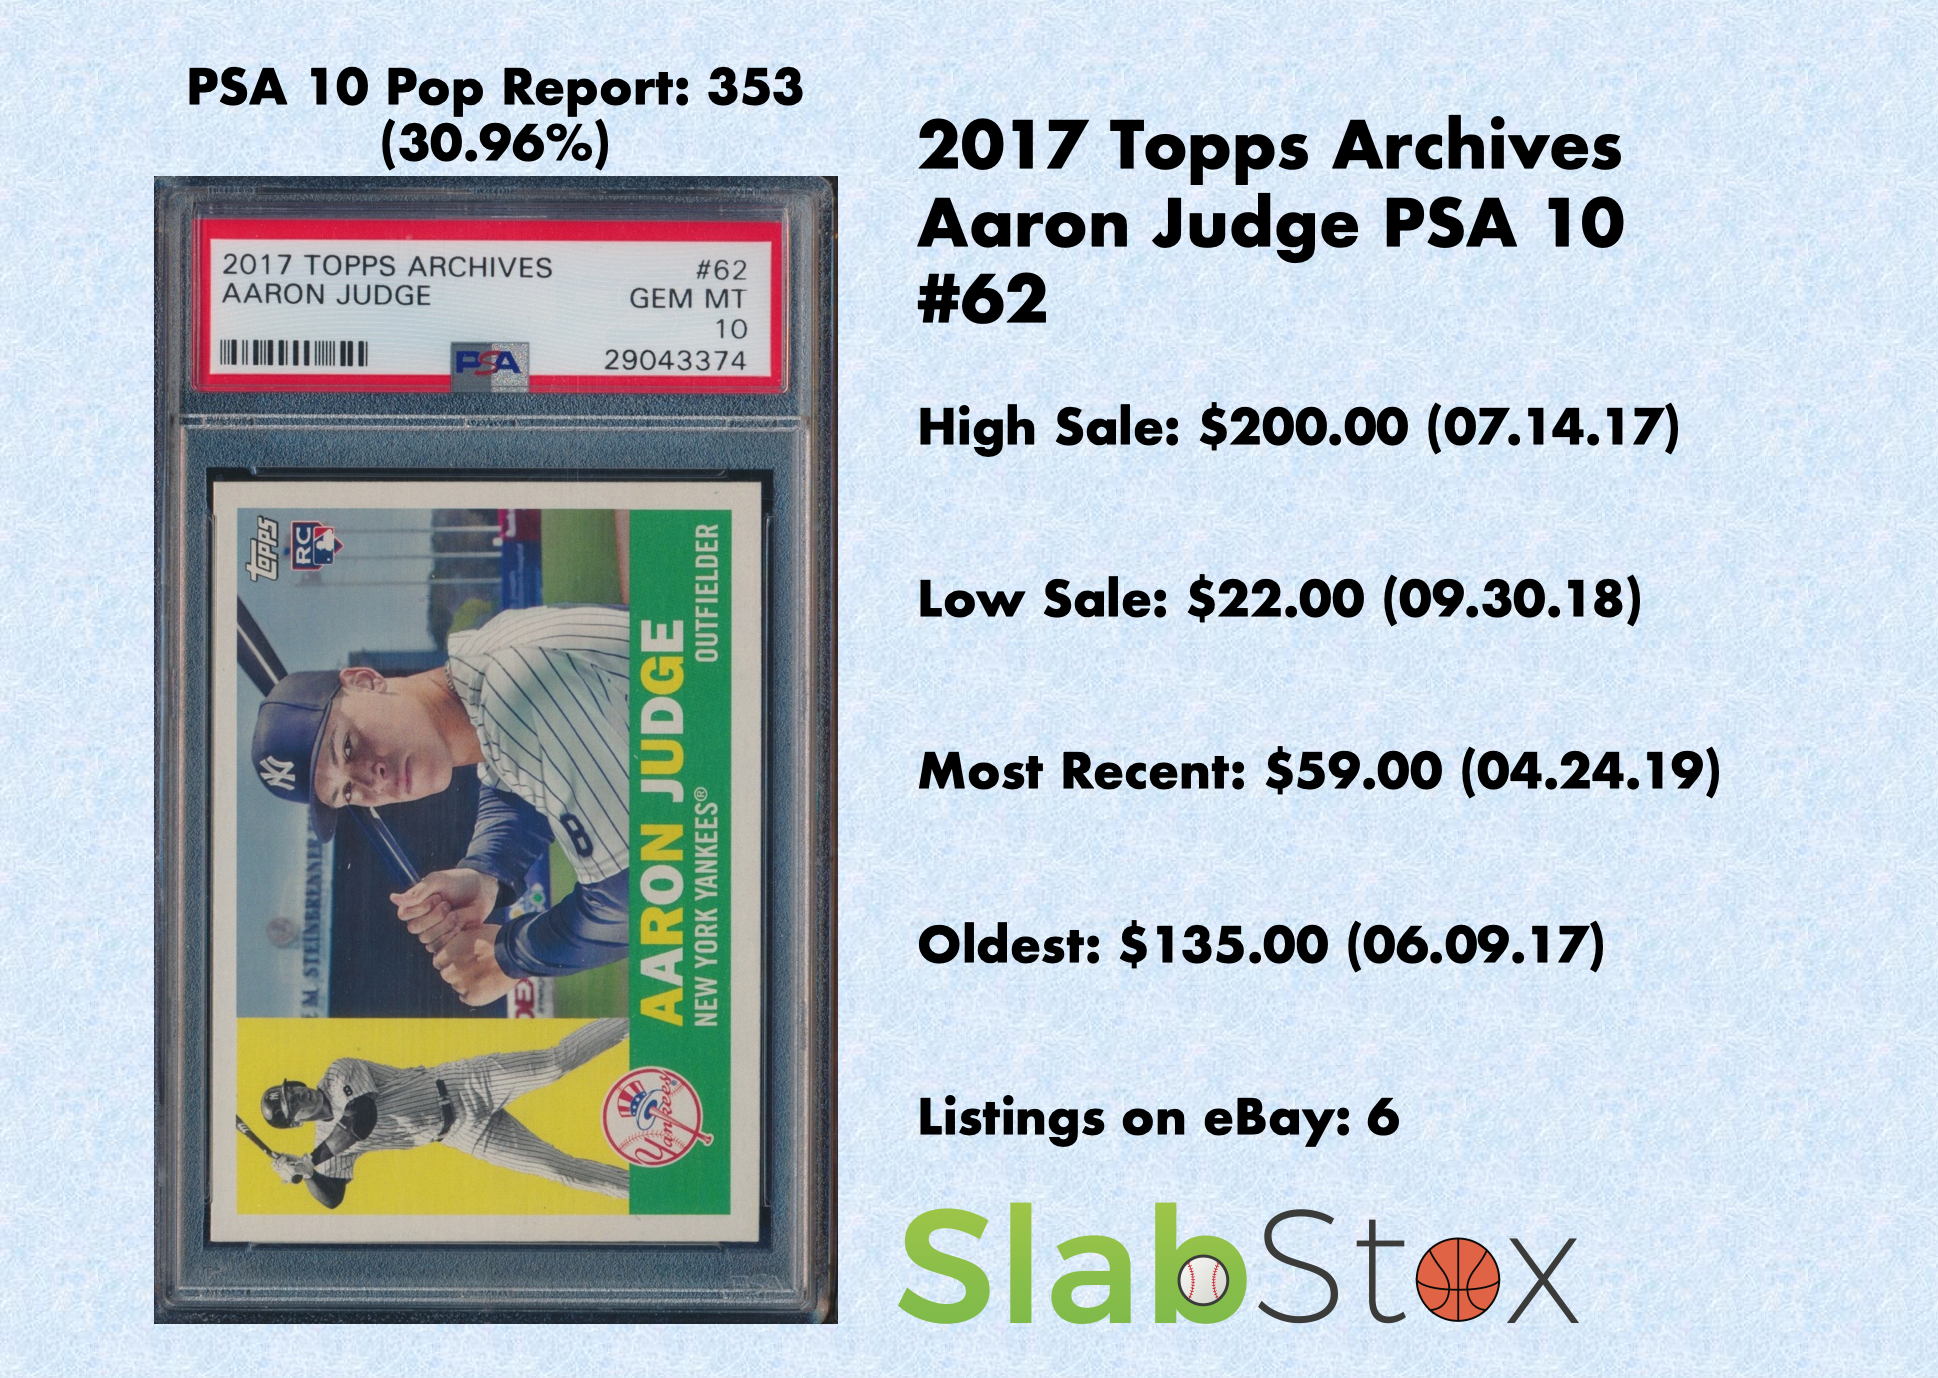 2017 Topps Archives Aaron Judge PSA 10 sports card